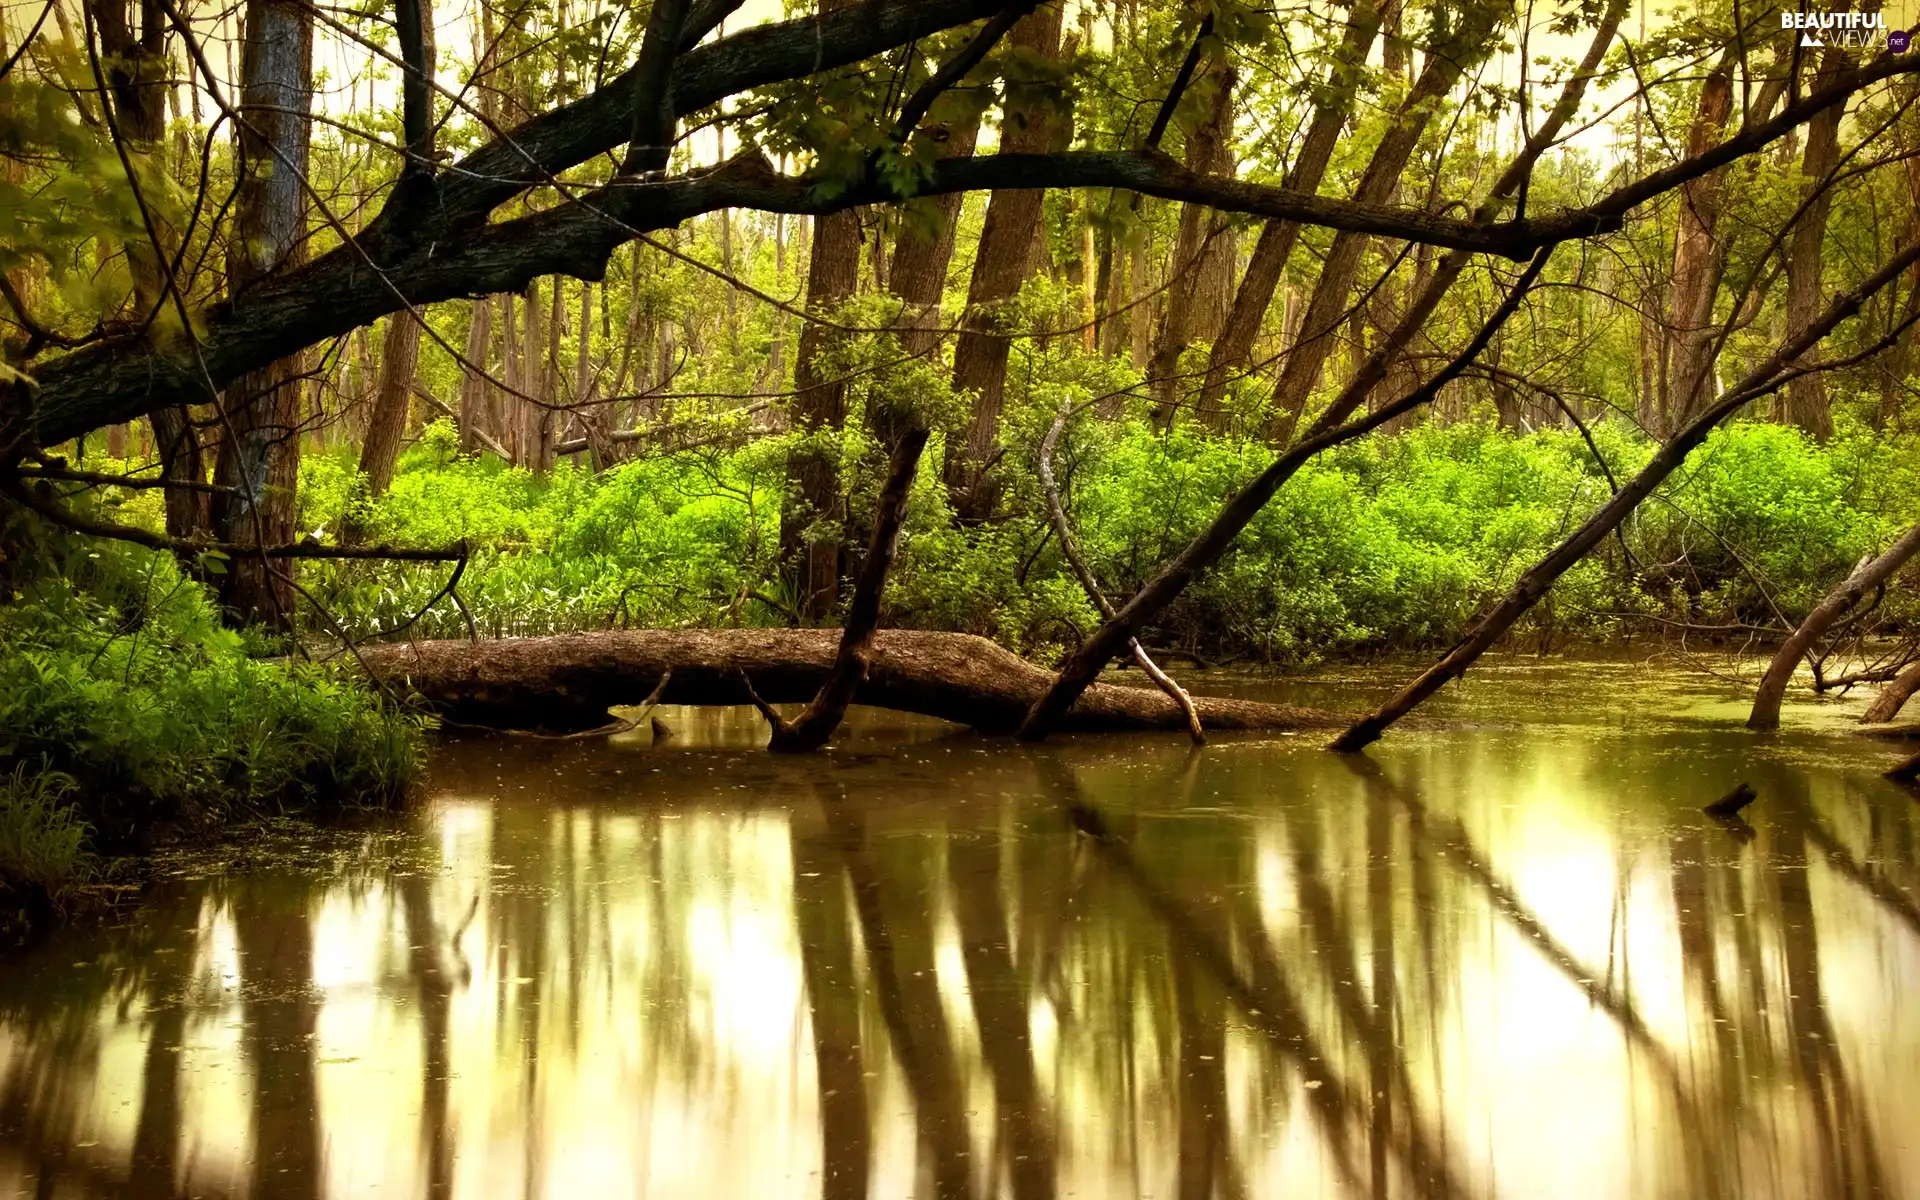 River, reflection, green ones, Bush, forest